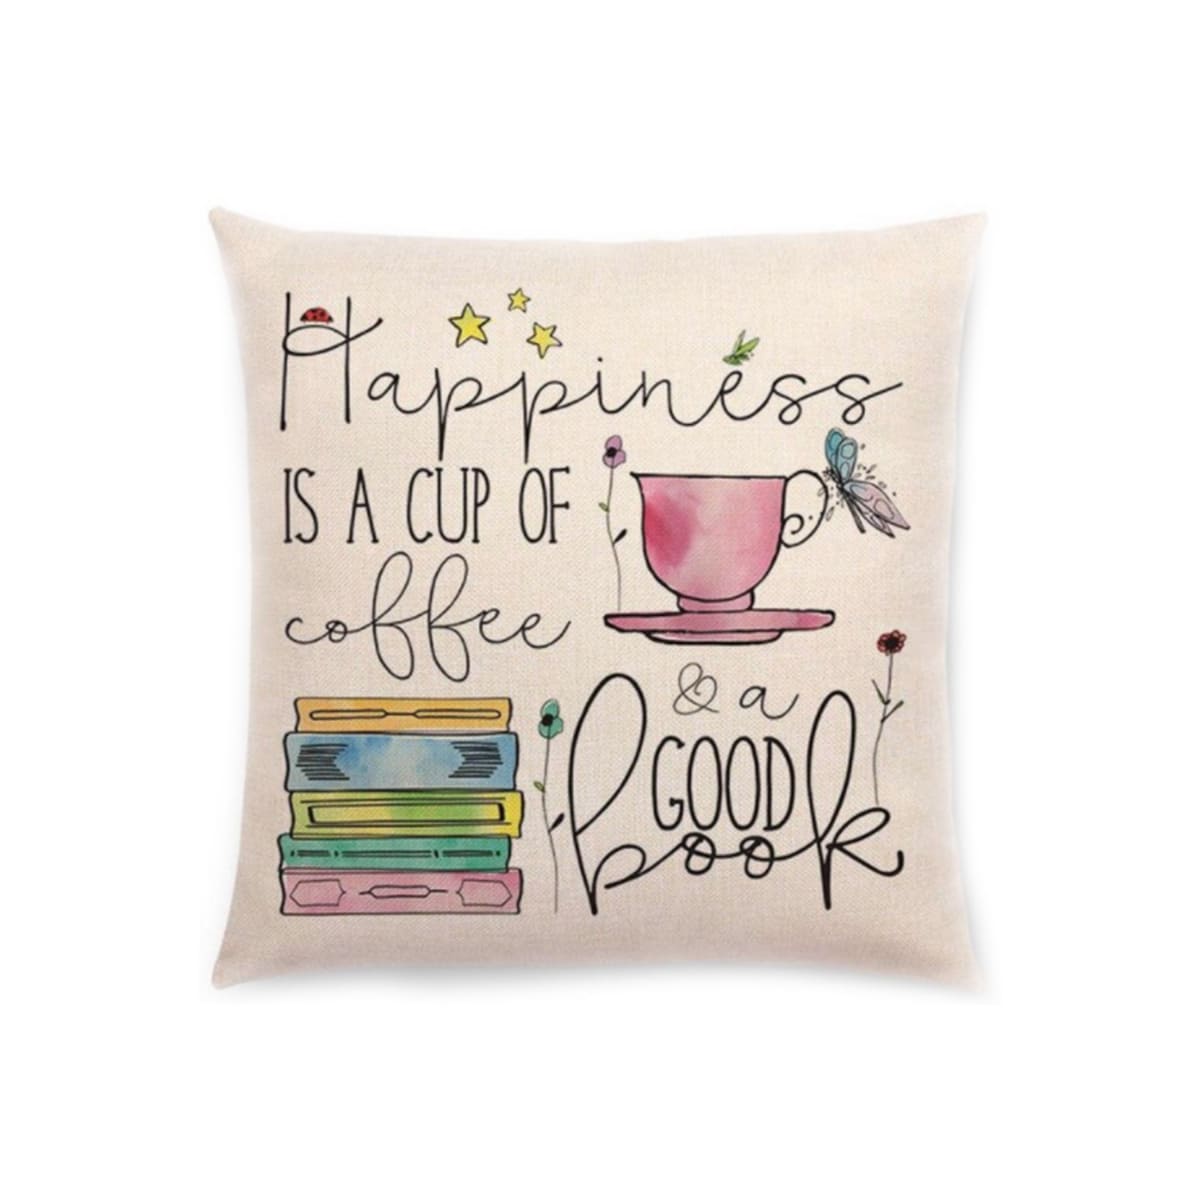 Almofada Frase "Happiness is a Cup of Coffee & a Good Book"